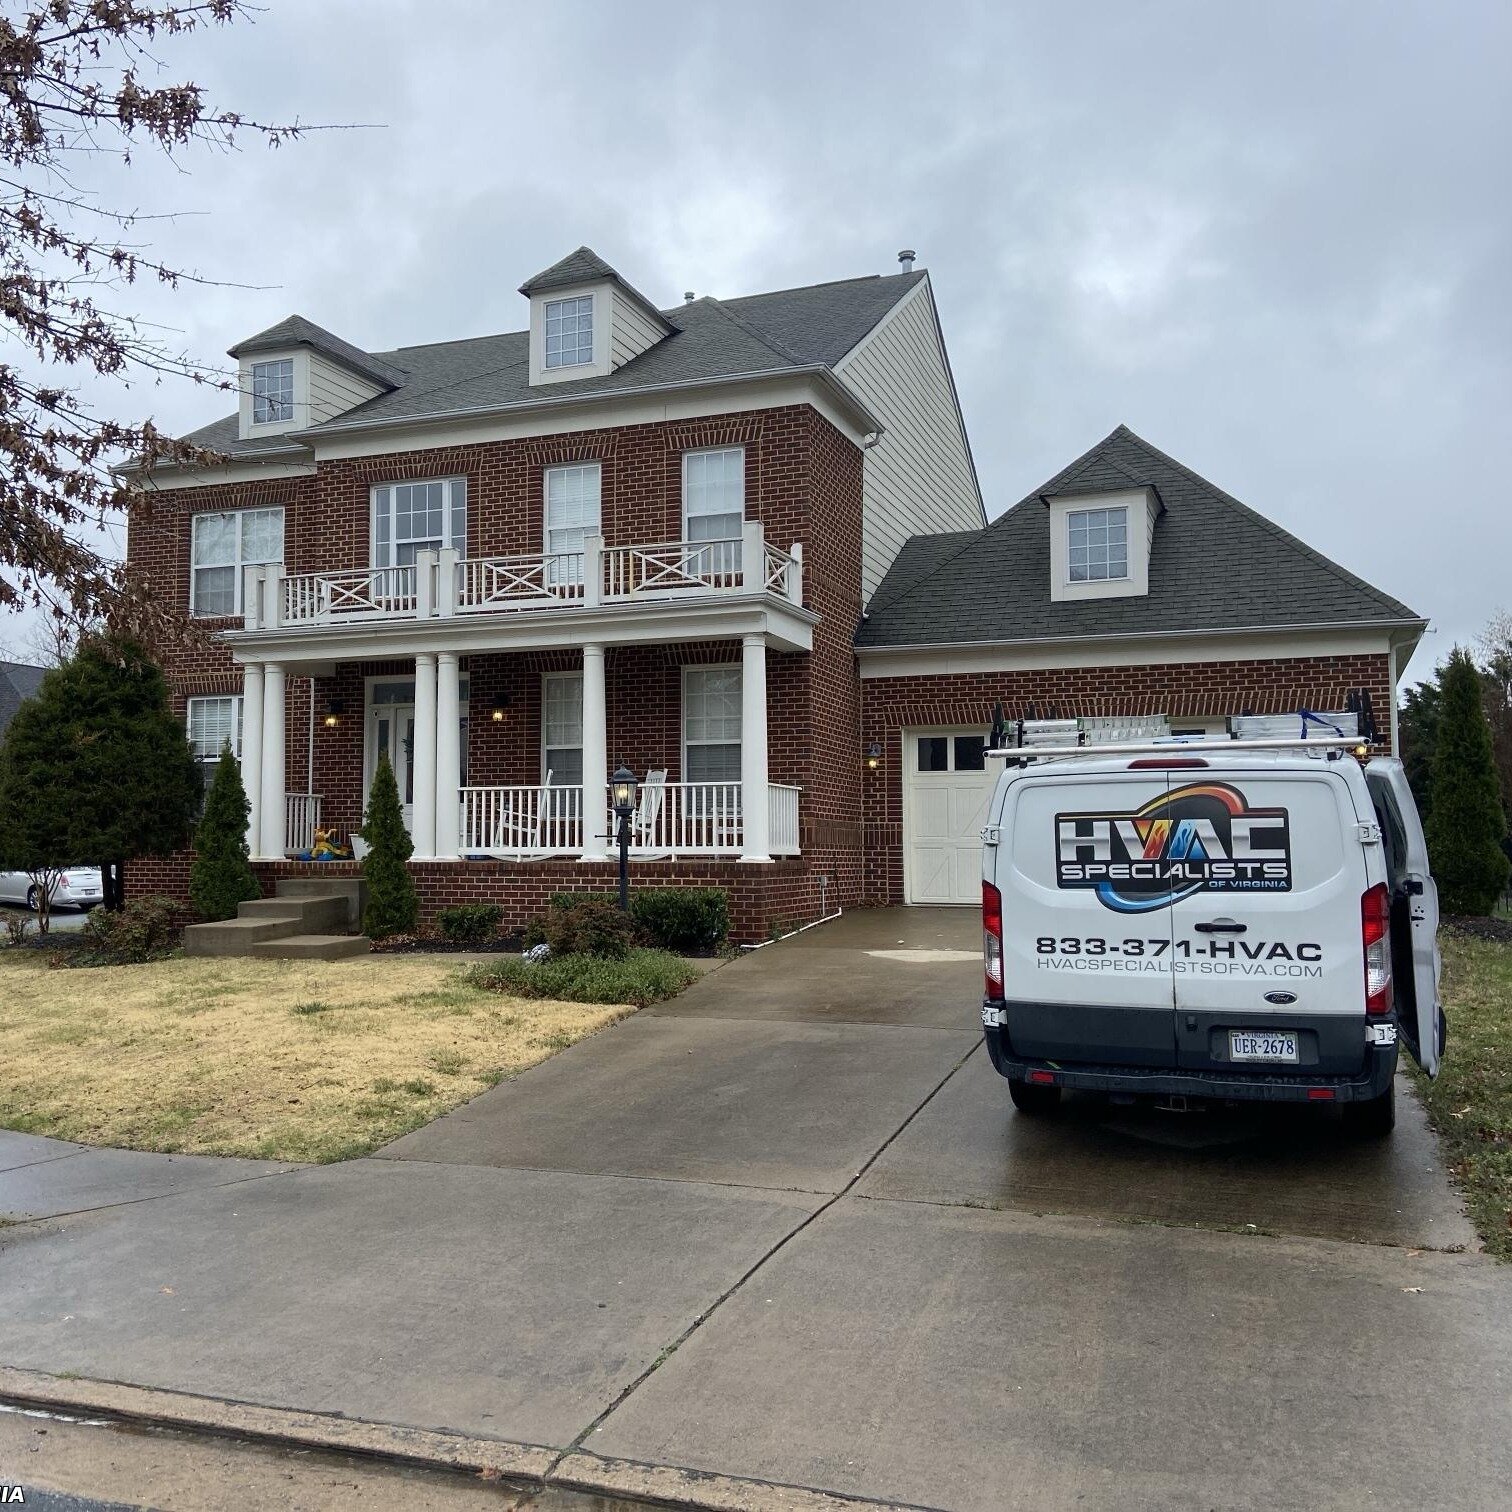 HVAC Specialists of Virginia just wrapped up a successful two-system replacement at this Idlewild home! 🏡 

Heating and cooling systems can be complicated, but with the Bryant&reg; Preferred&trade; Series products working together throughout your ho